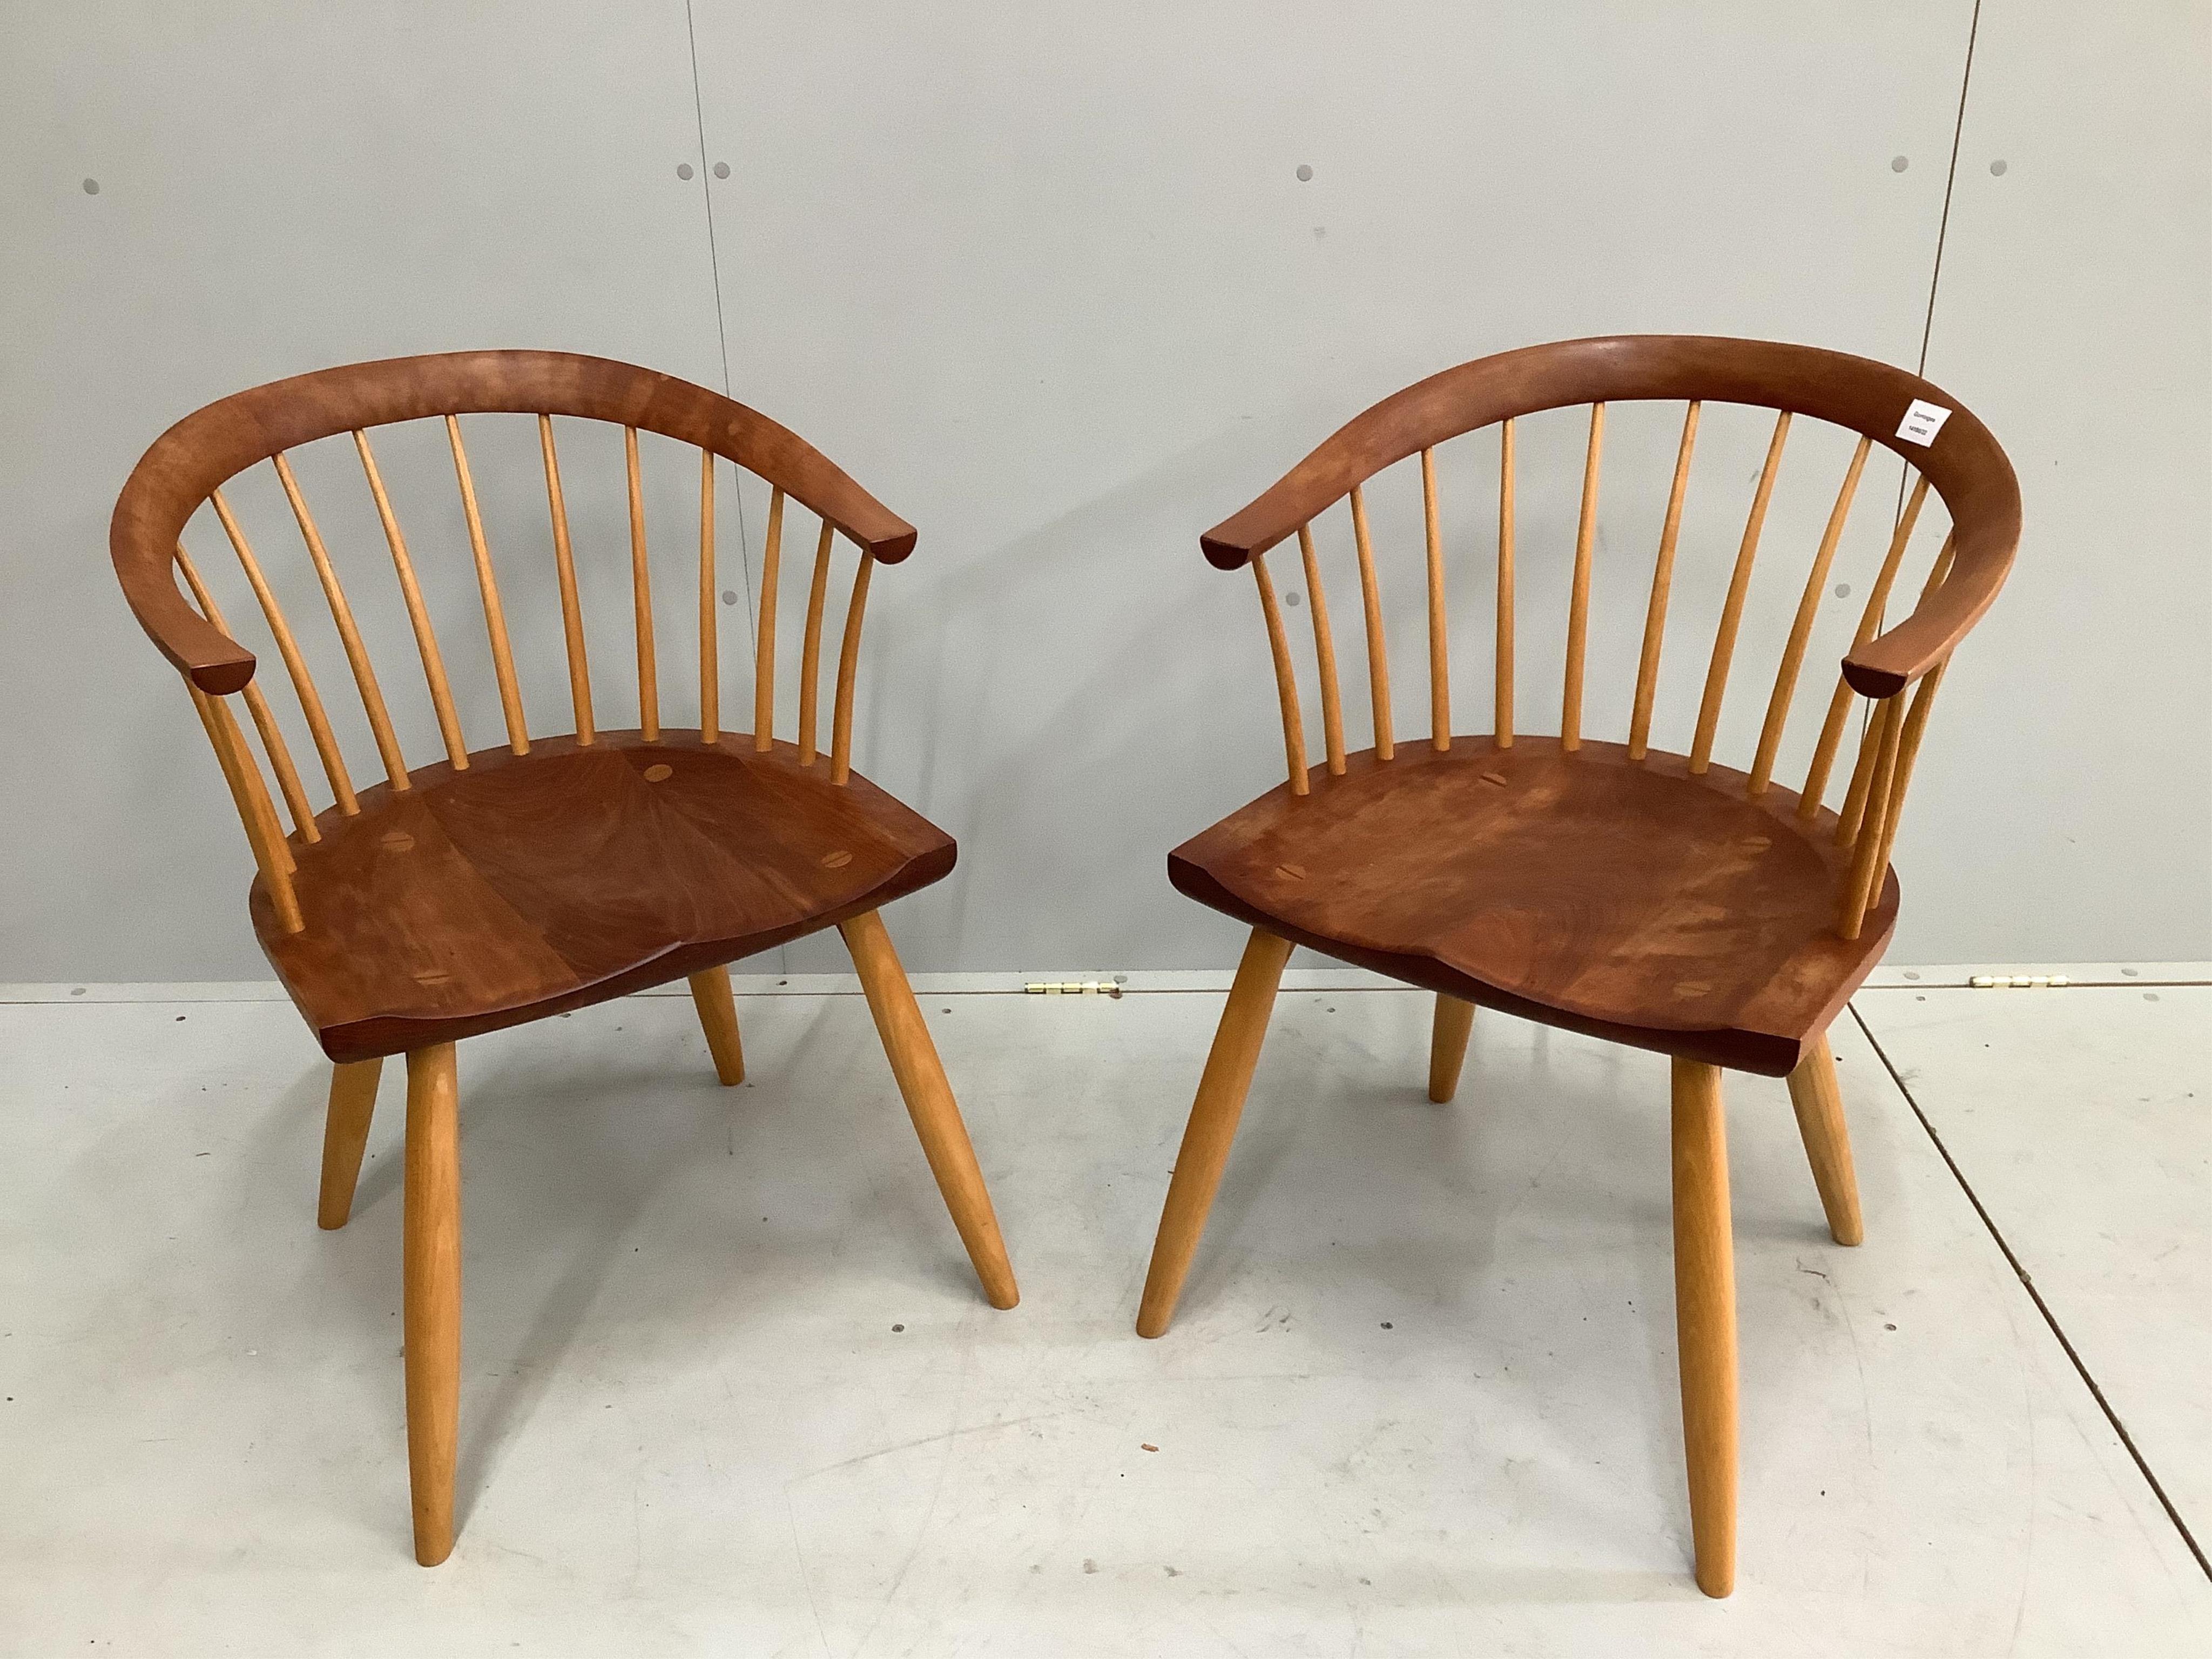 A pair of Thomas Moser cherrywood 'Newport' armchairs, width 56cm, depth 47cm, height 80cm. Condition - good